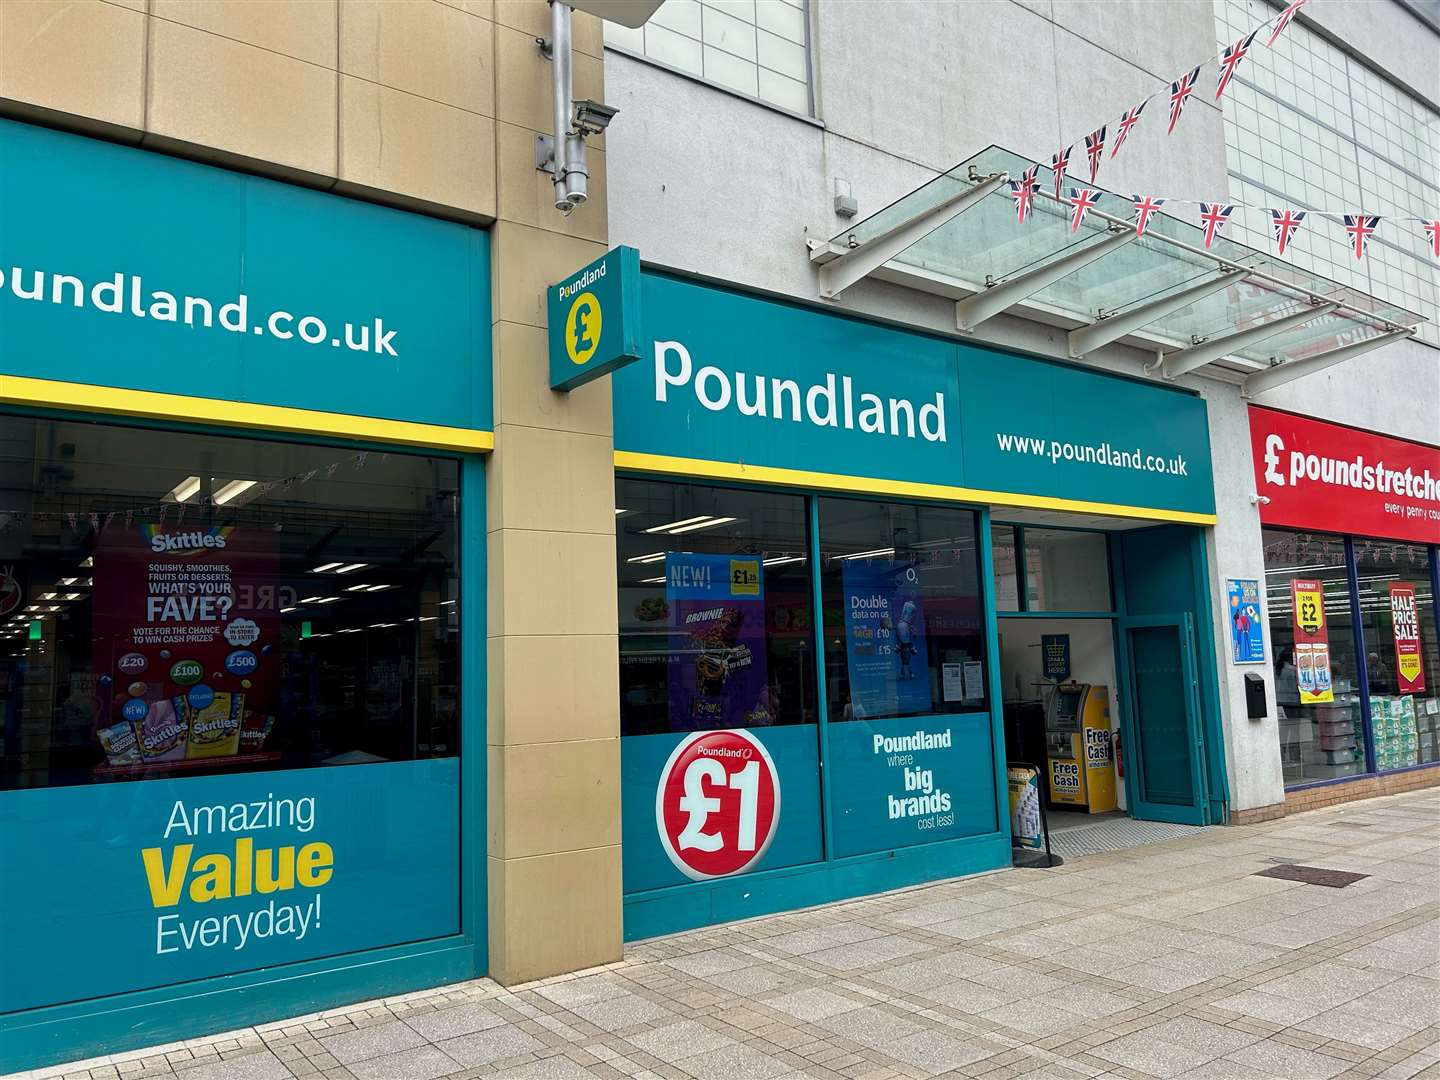 The Poundland store on Broad Street looks set to be replaced with an “exciting new brand”